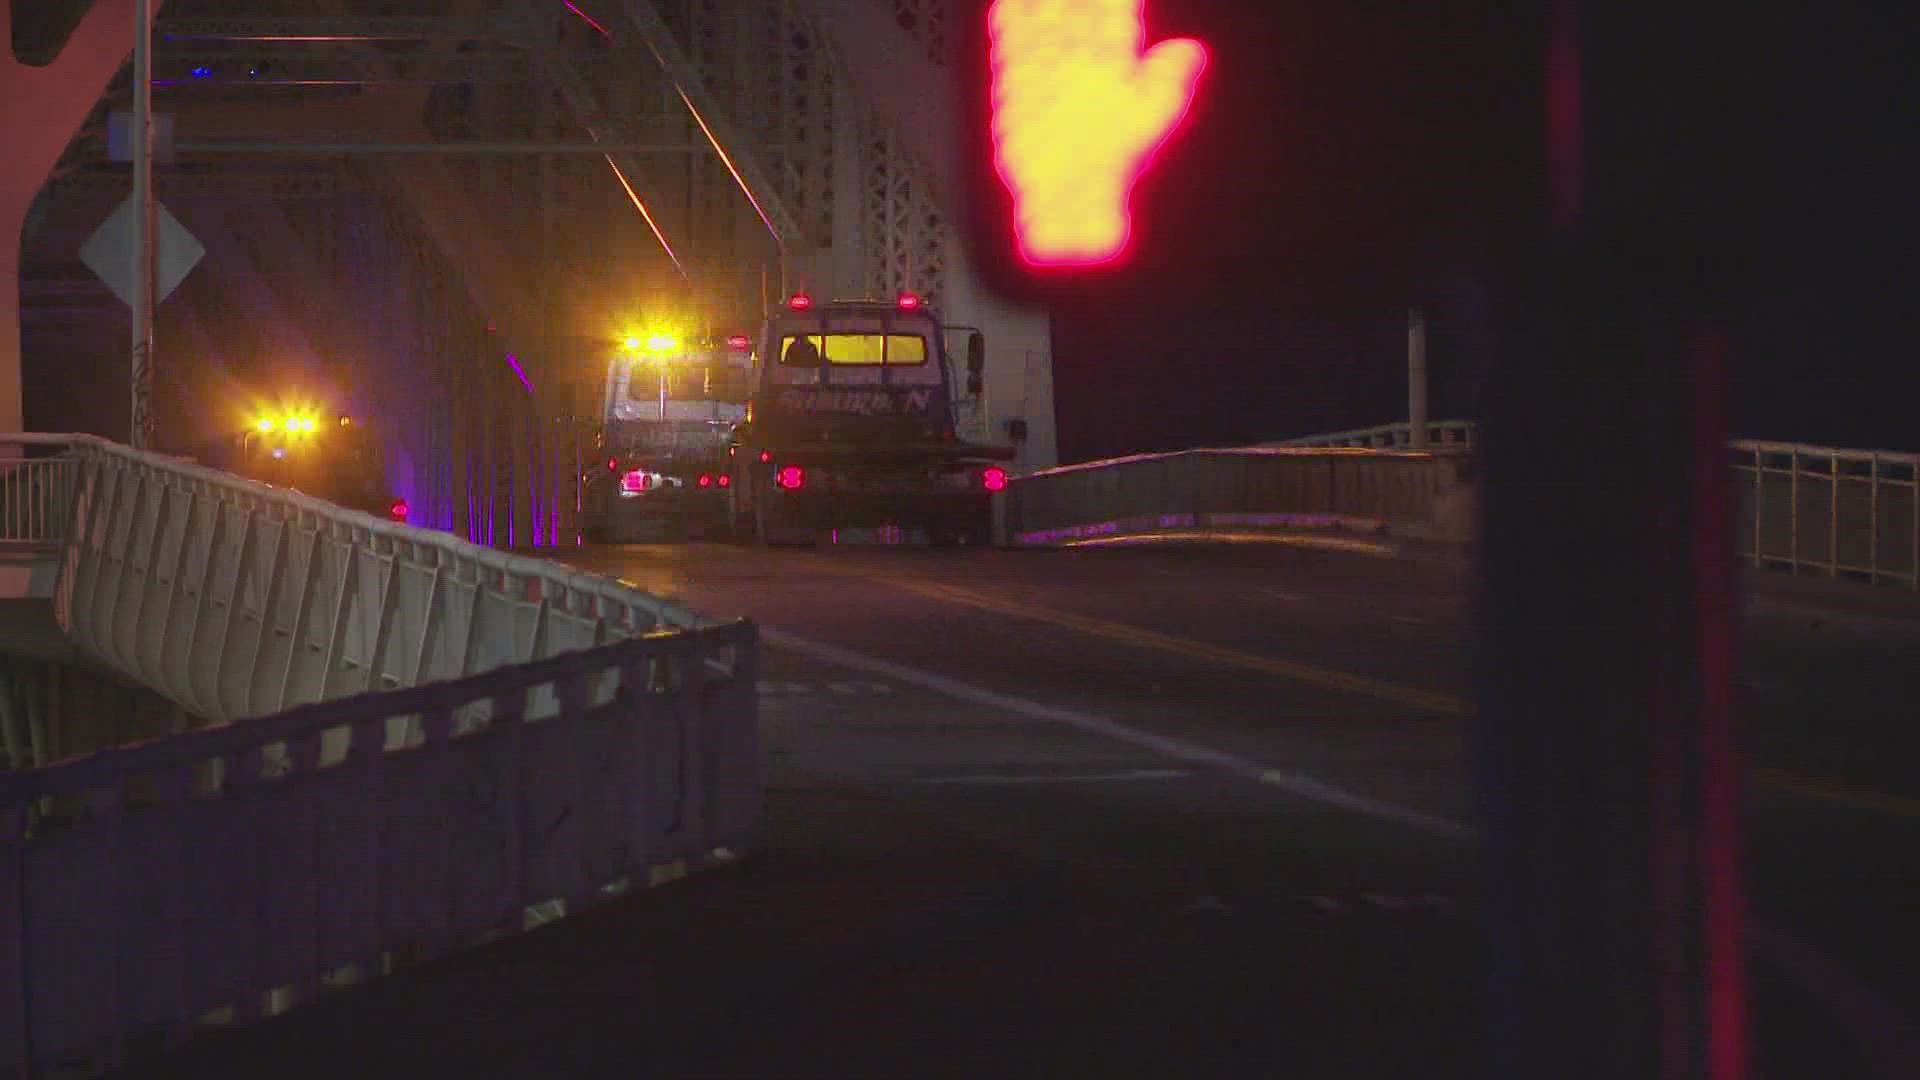 Police say a U-Haul headed northbound on the bridge lost control, going into the southbound lane and crashing into another vehicle Saturday night.